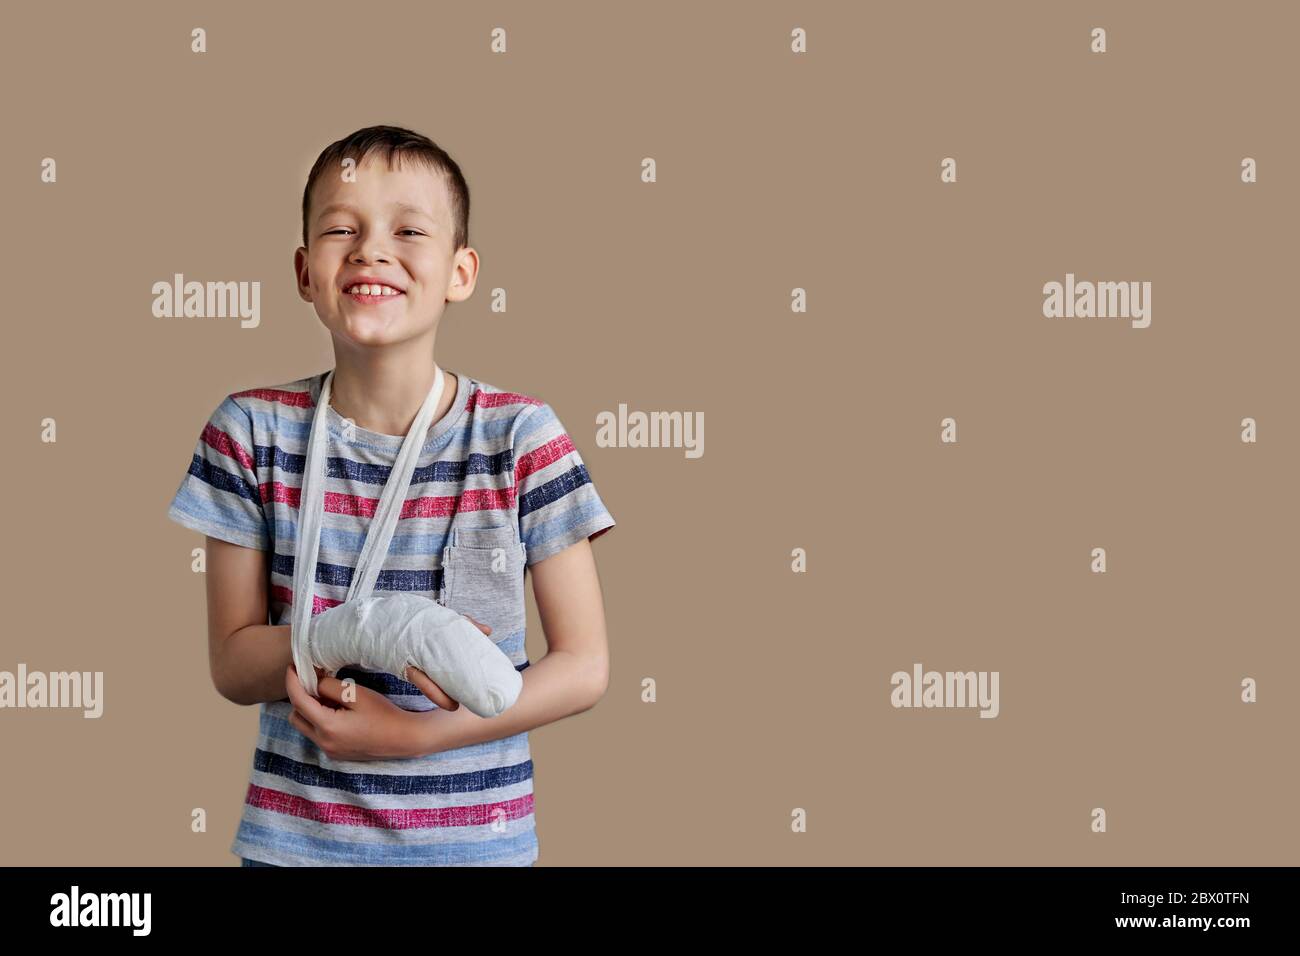 a child in a striped t-shirt with a bandage wrapped around his arm. Arm injury. Stock Photo